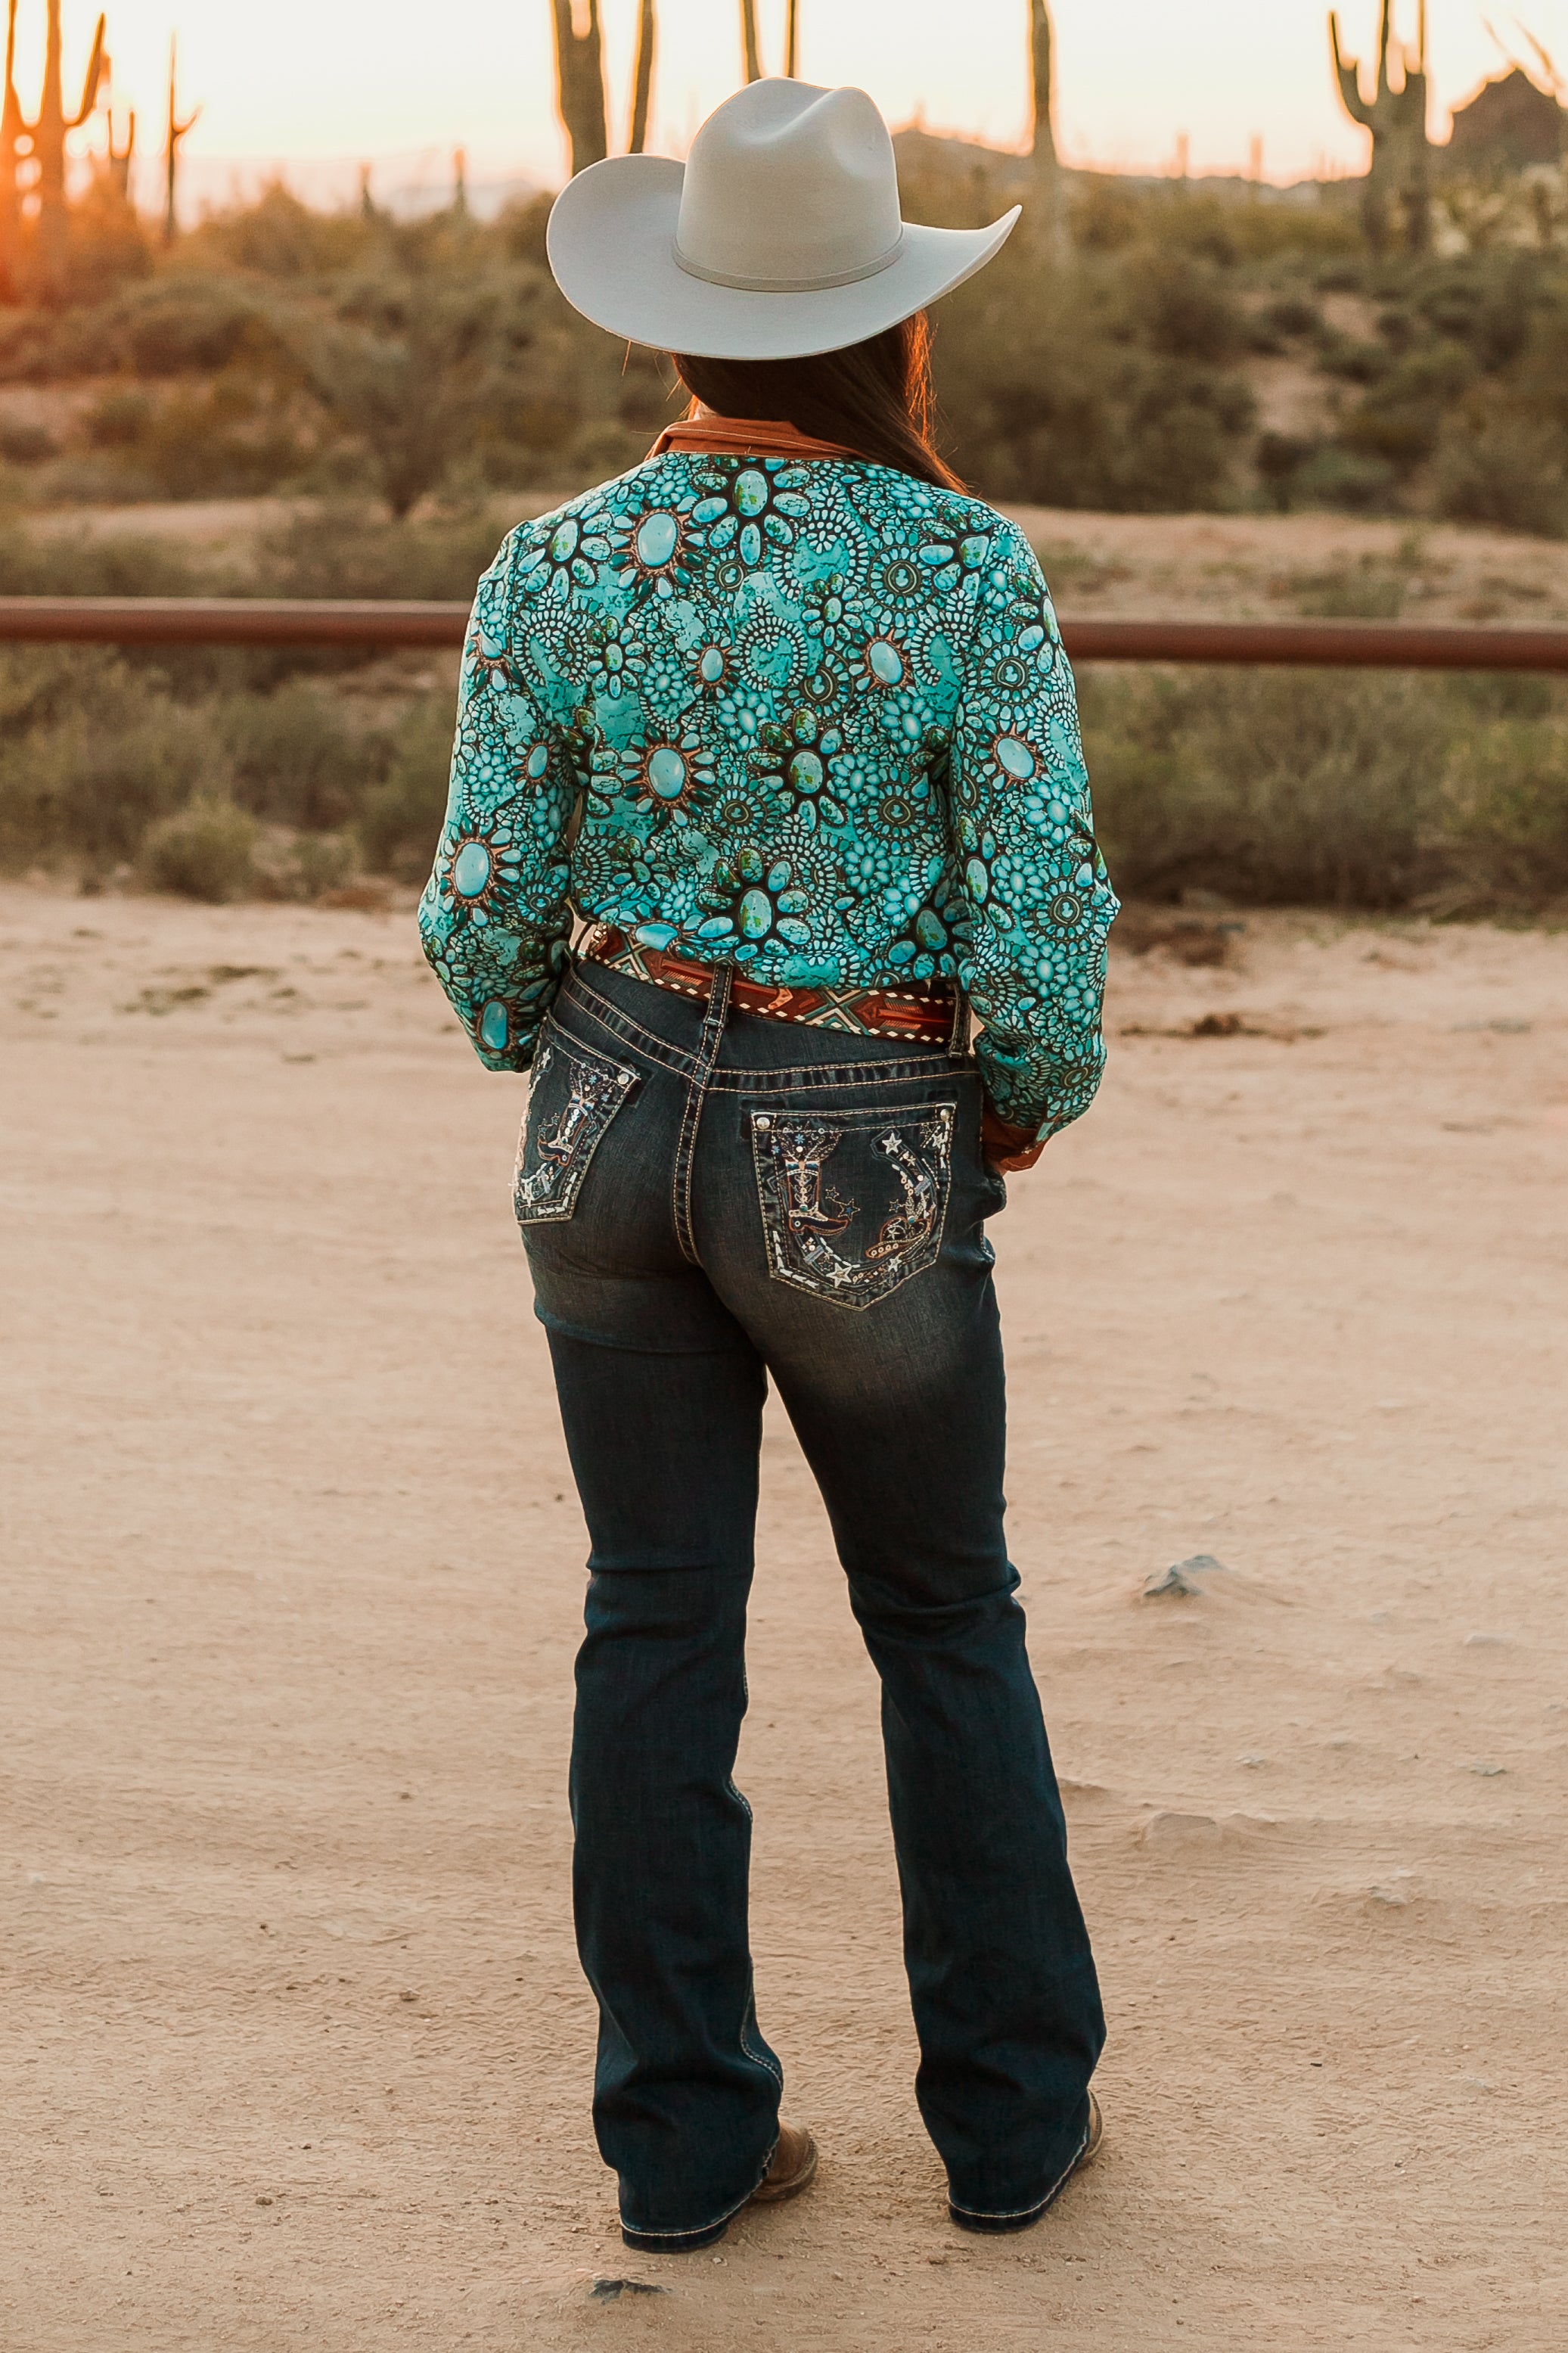 Boot Scootin Boogie Bootcut Jeans - The Glamorous Cowgirl